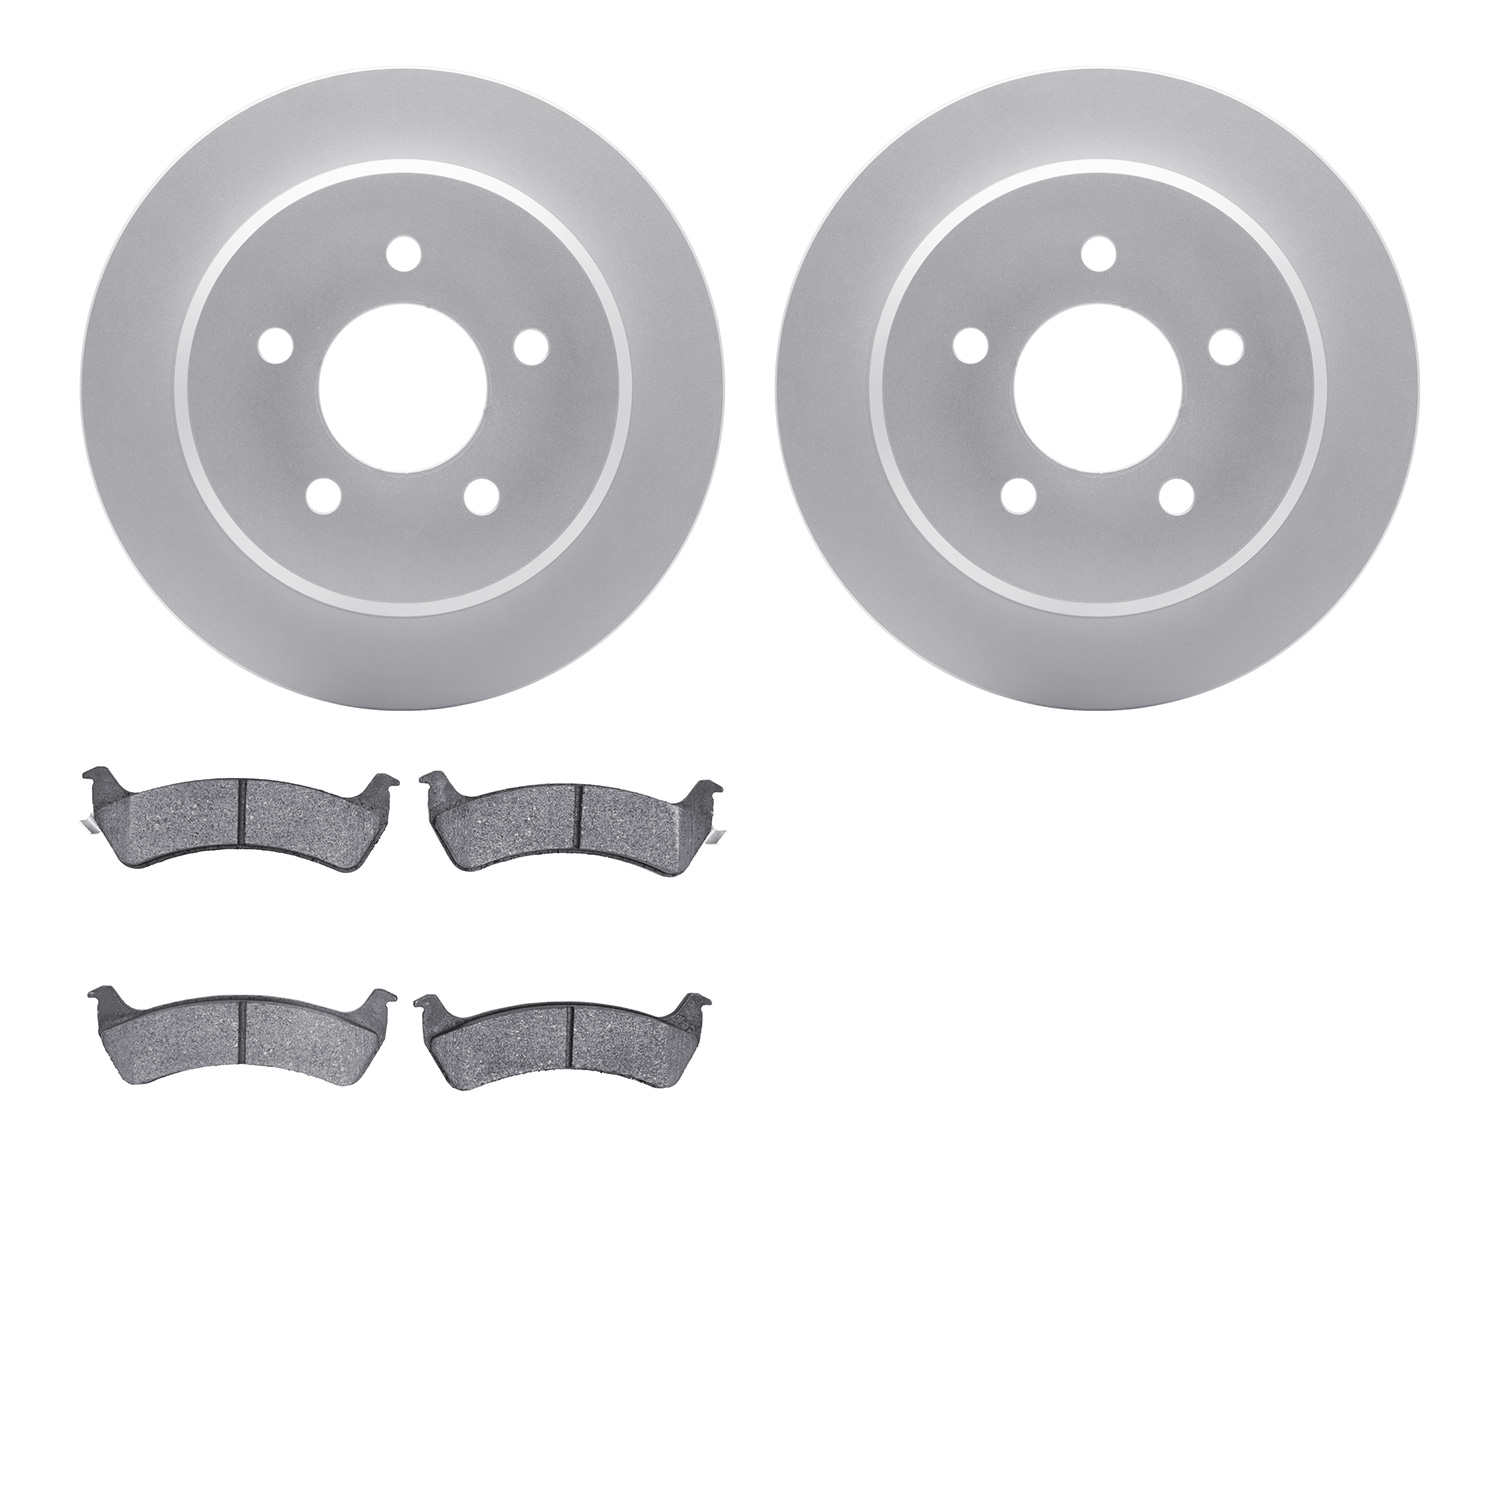 4402-54014 Geospec Brake Rotors with Ultimate-Duty Brake Pads Kit, 2001-2002 Ford/Lincoln/Mercury/Mazda, Position: Rear